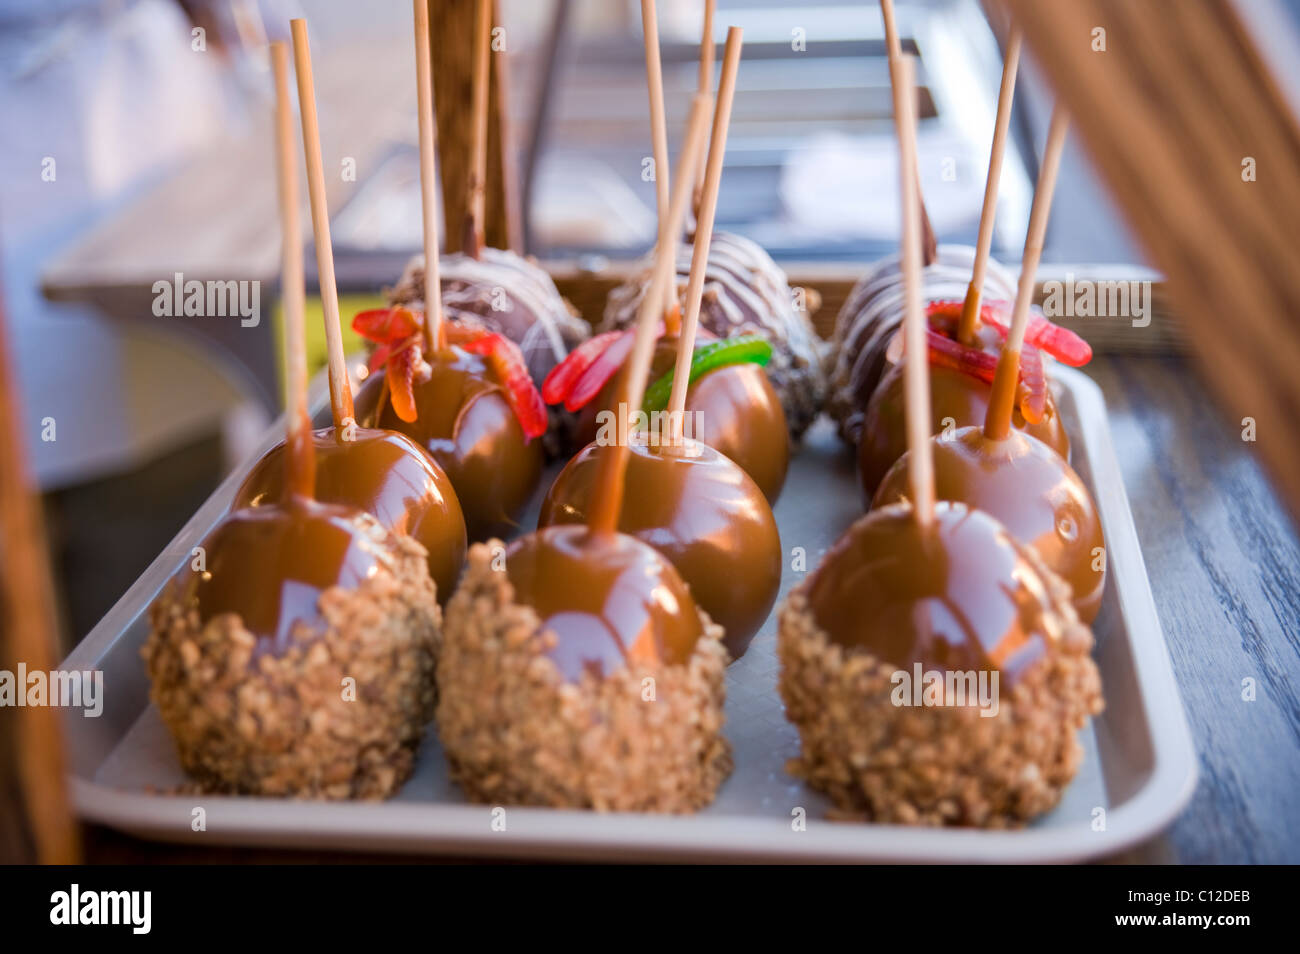 Candied apples for sale at a vendor's booth (some with worms) Stock Photo